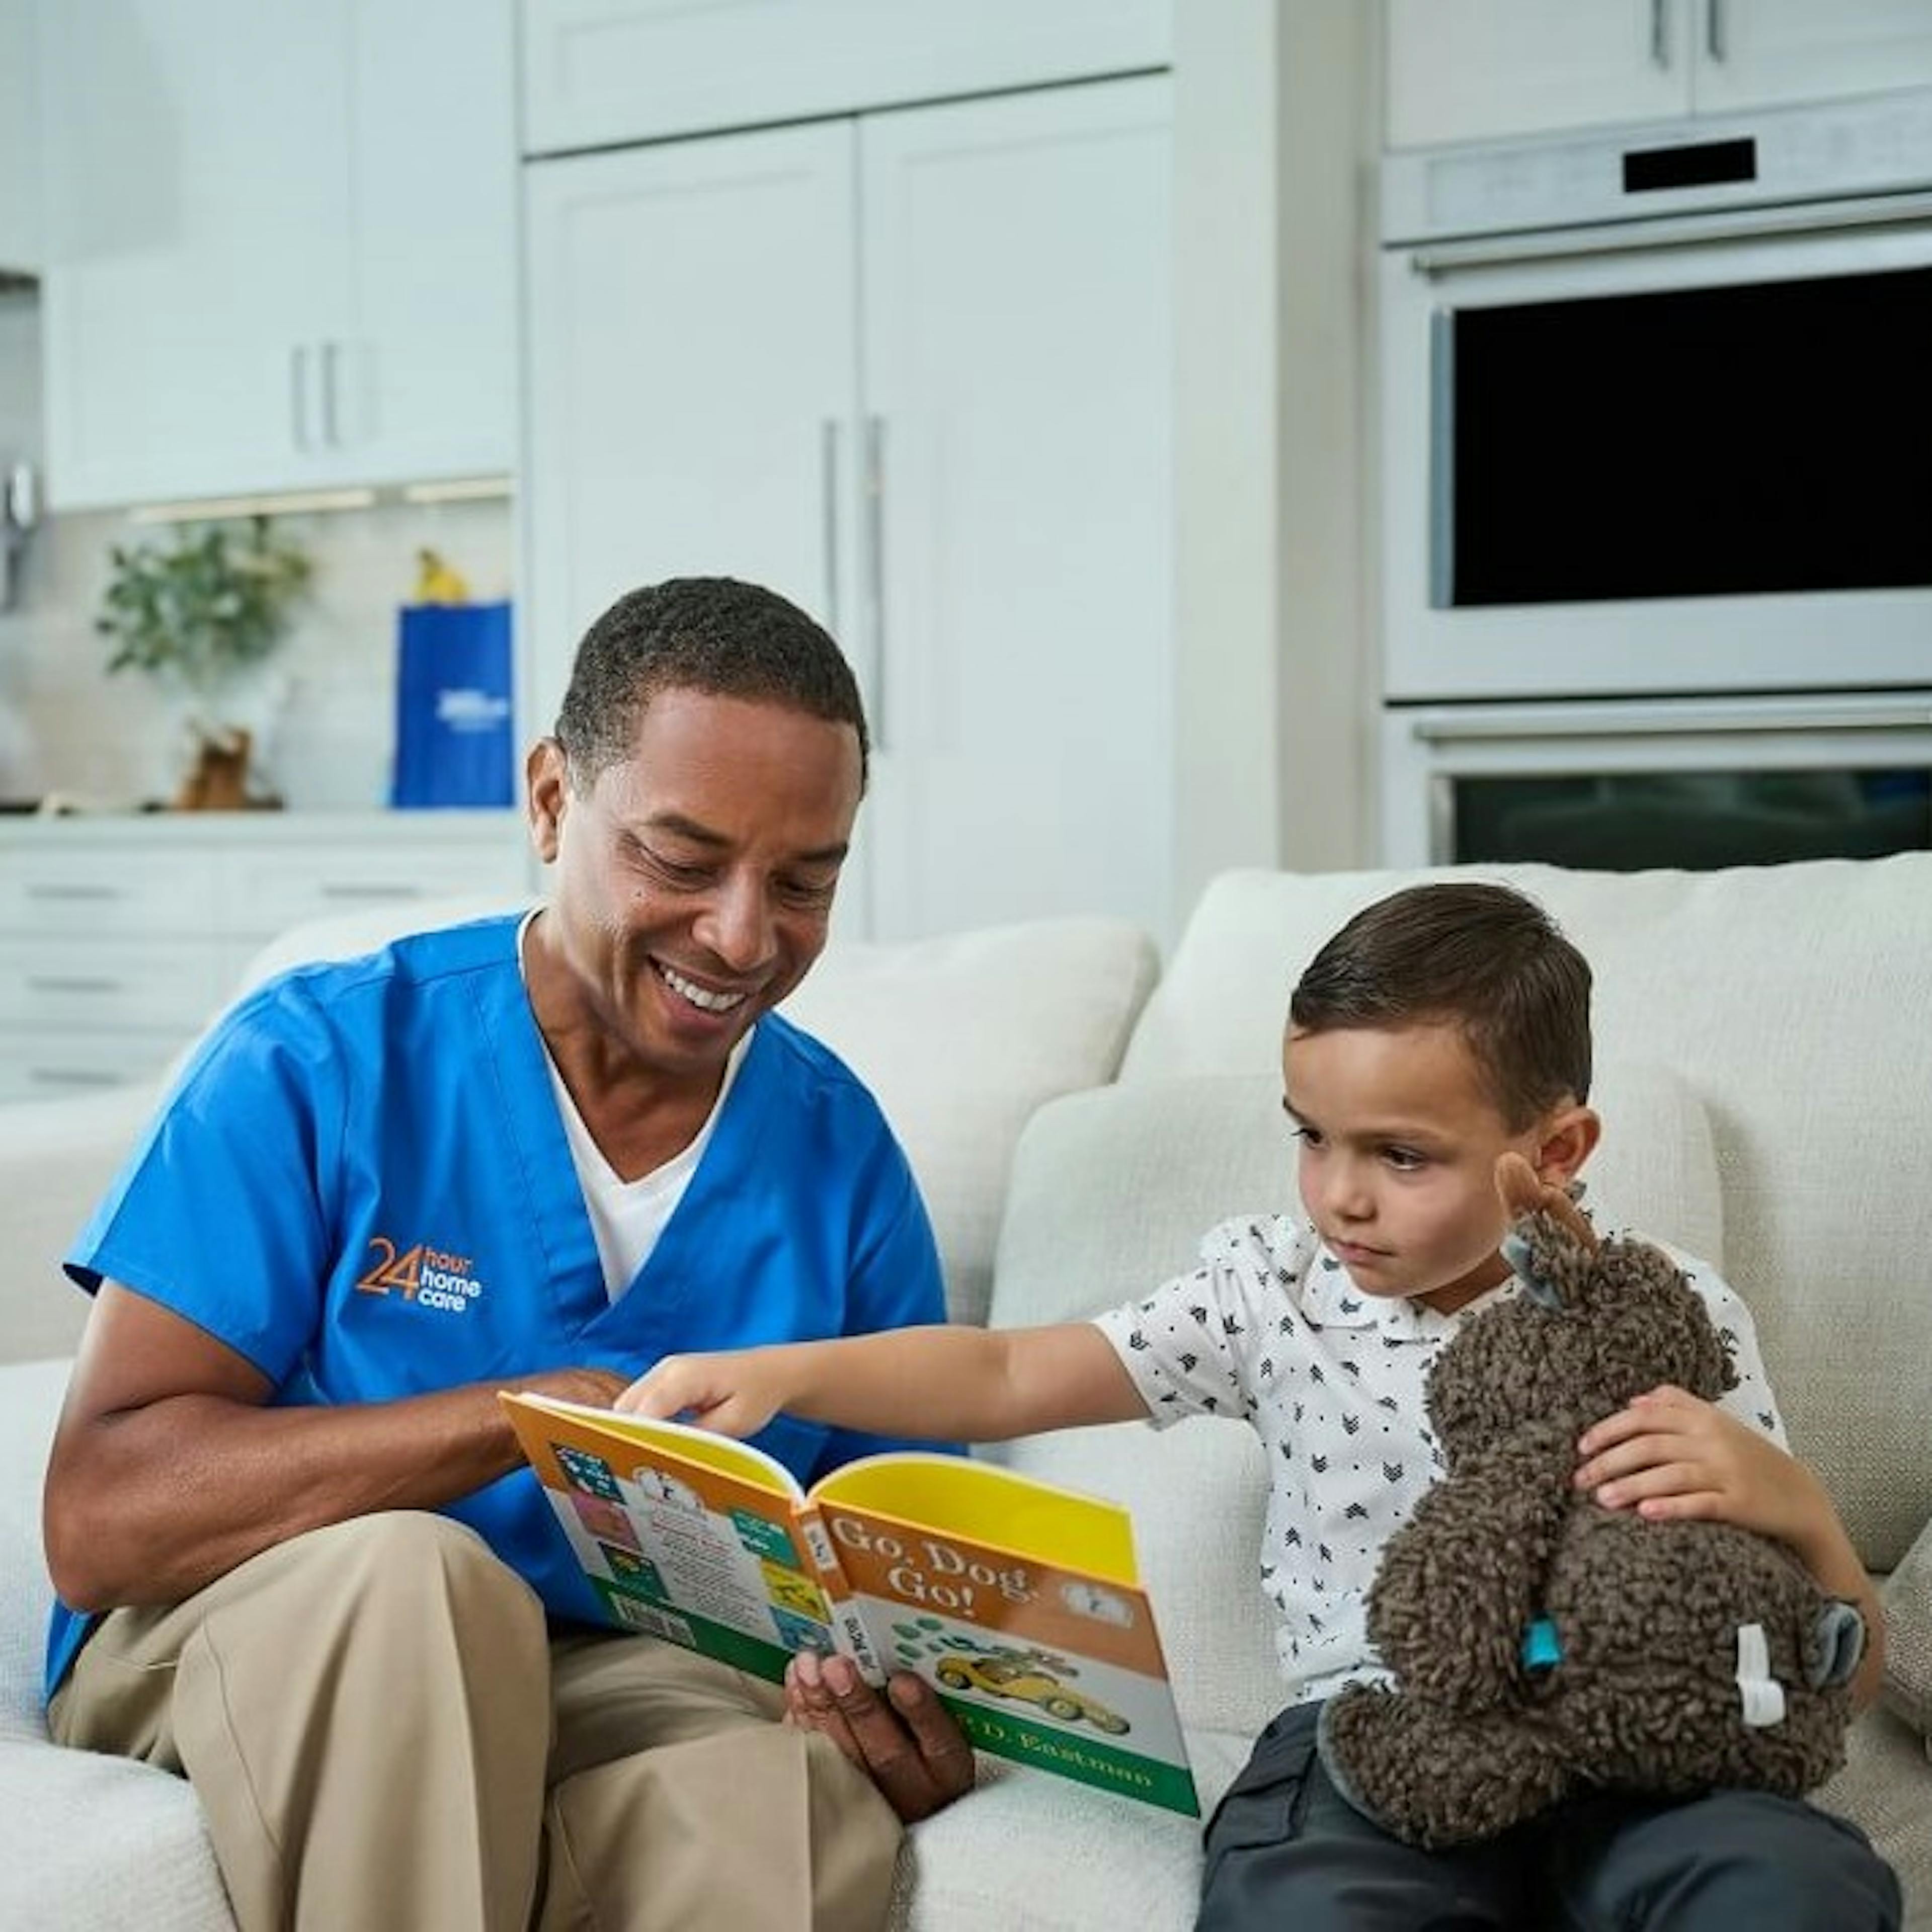 A caregiver reads with his child client on the couch while the mother does dishes in the background.